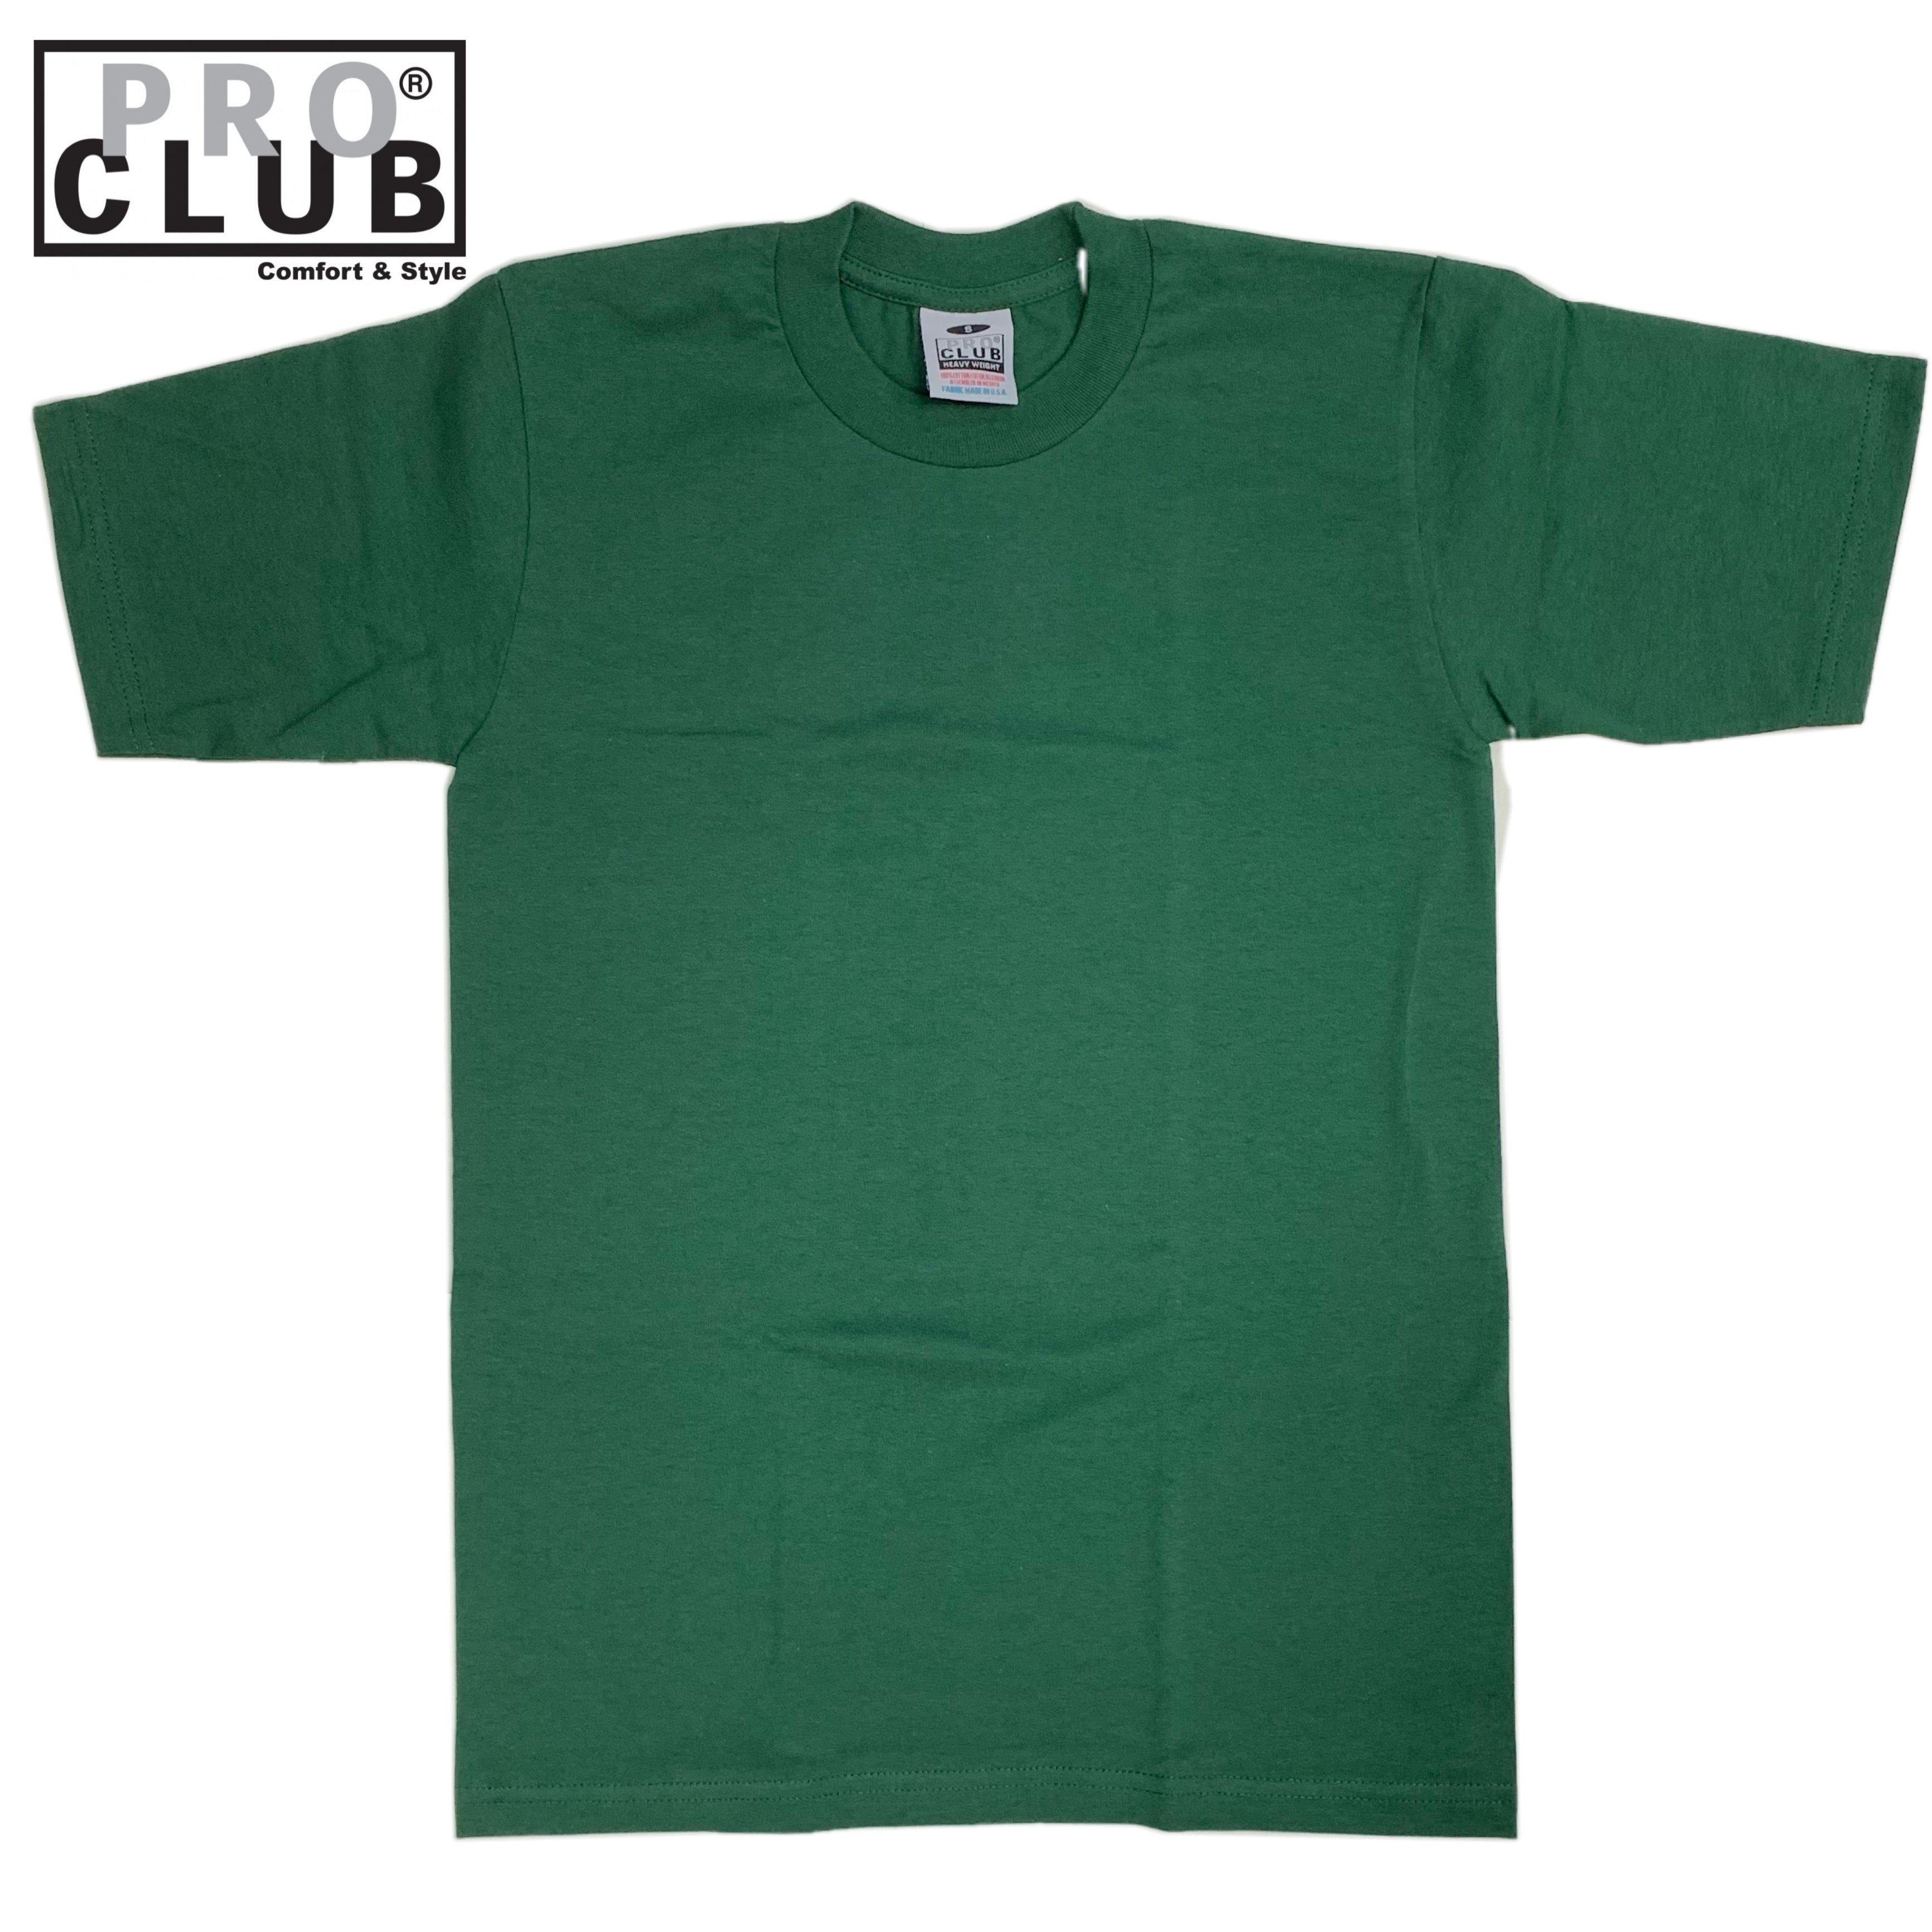 Shop Pro Club T-Shirts, Hoodies, Shorts, Heavyweight, Comfort, and More